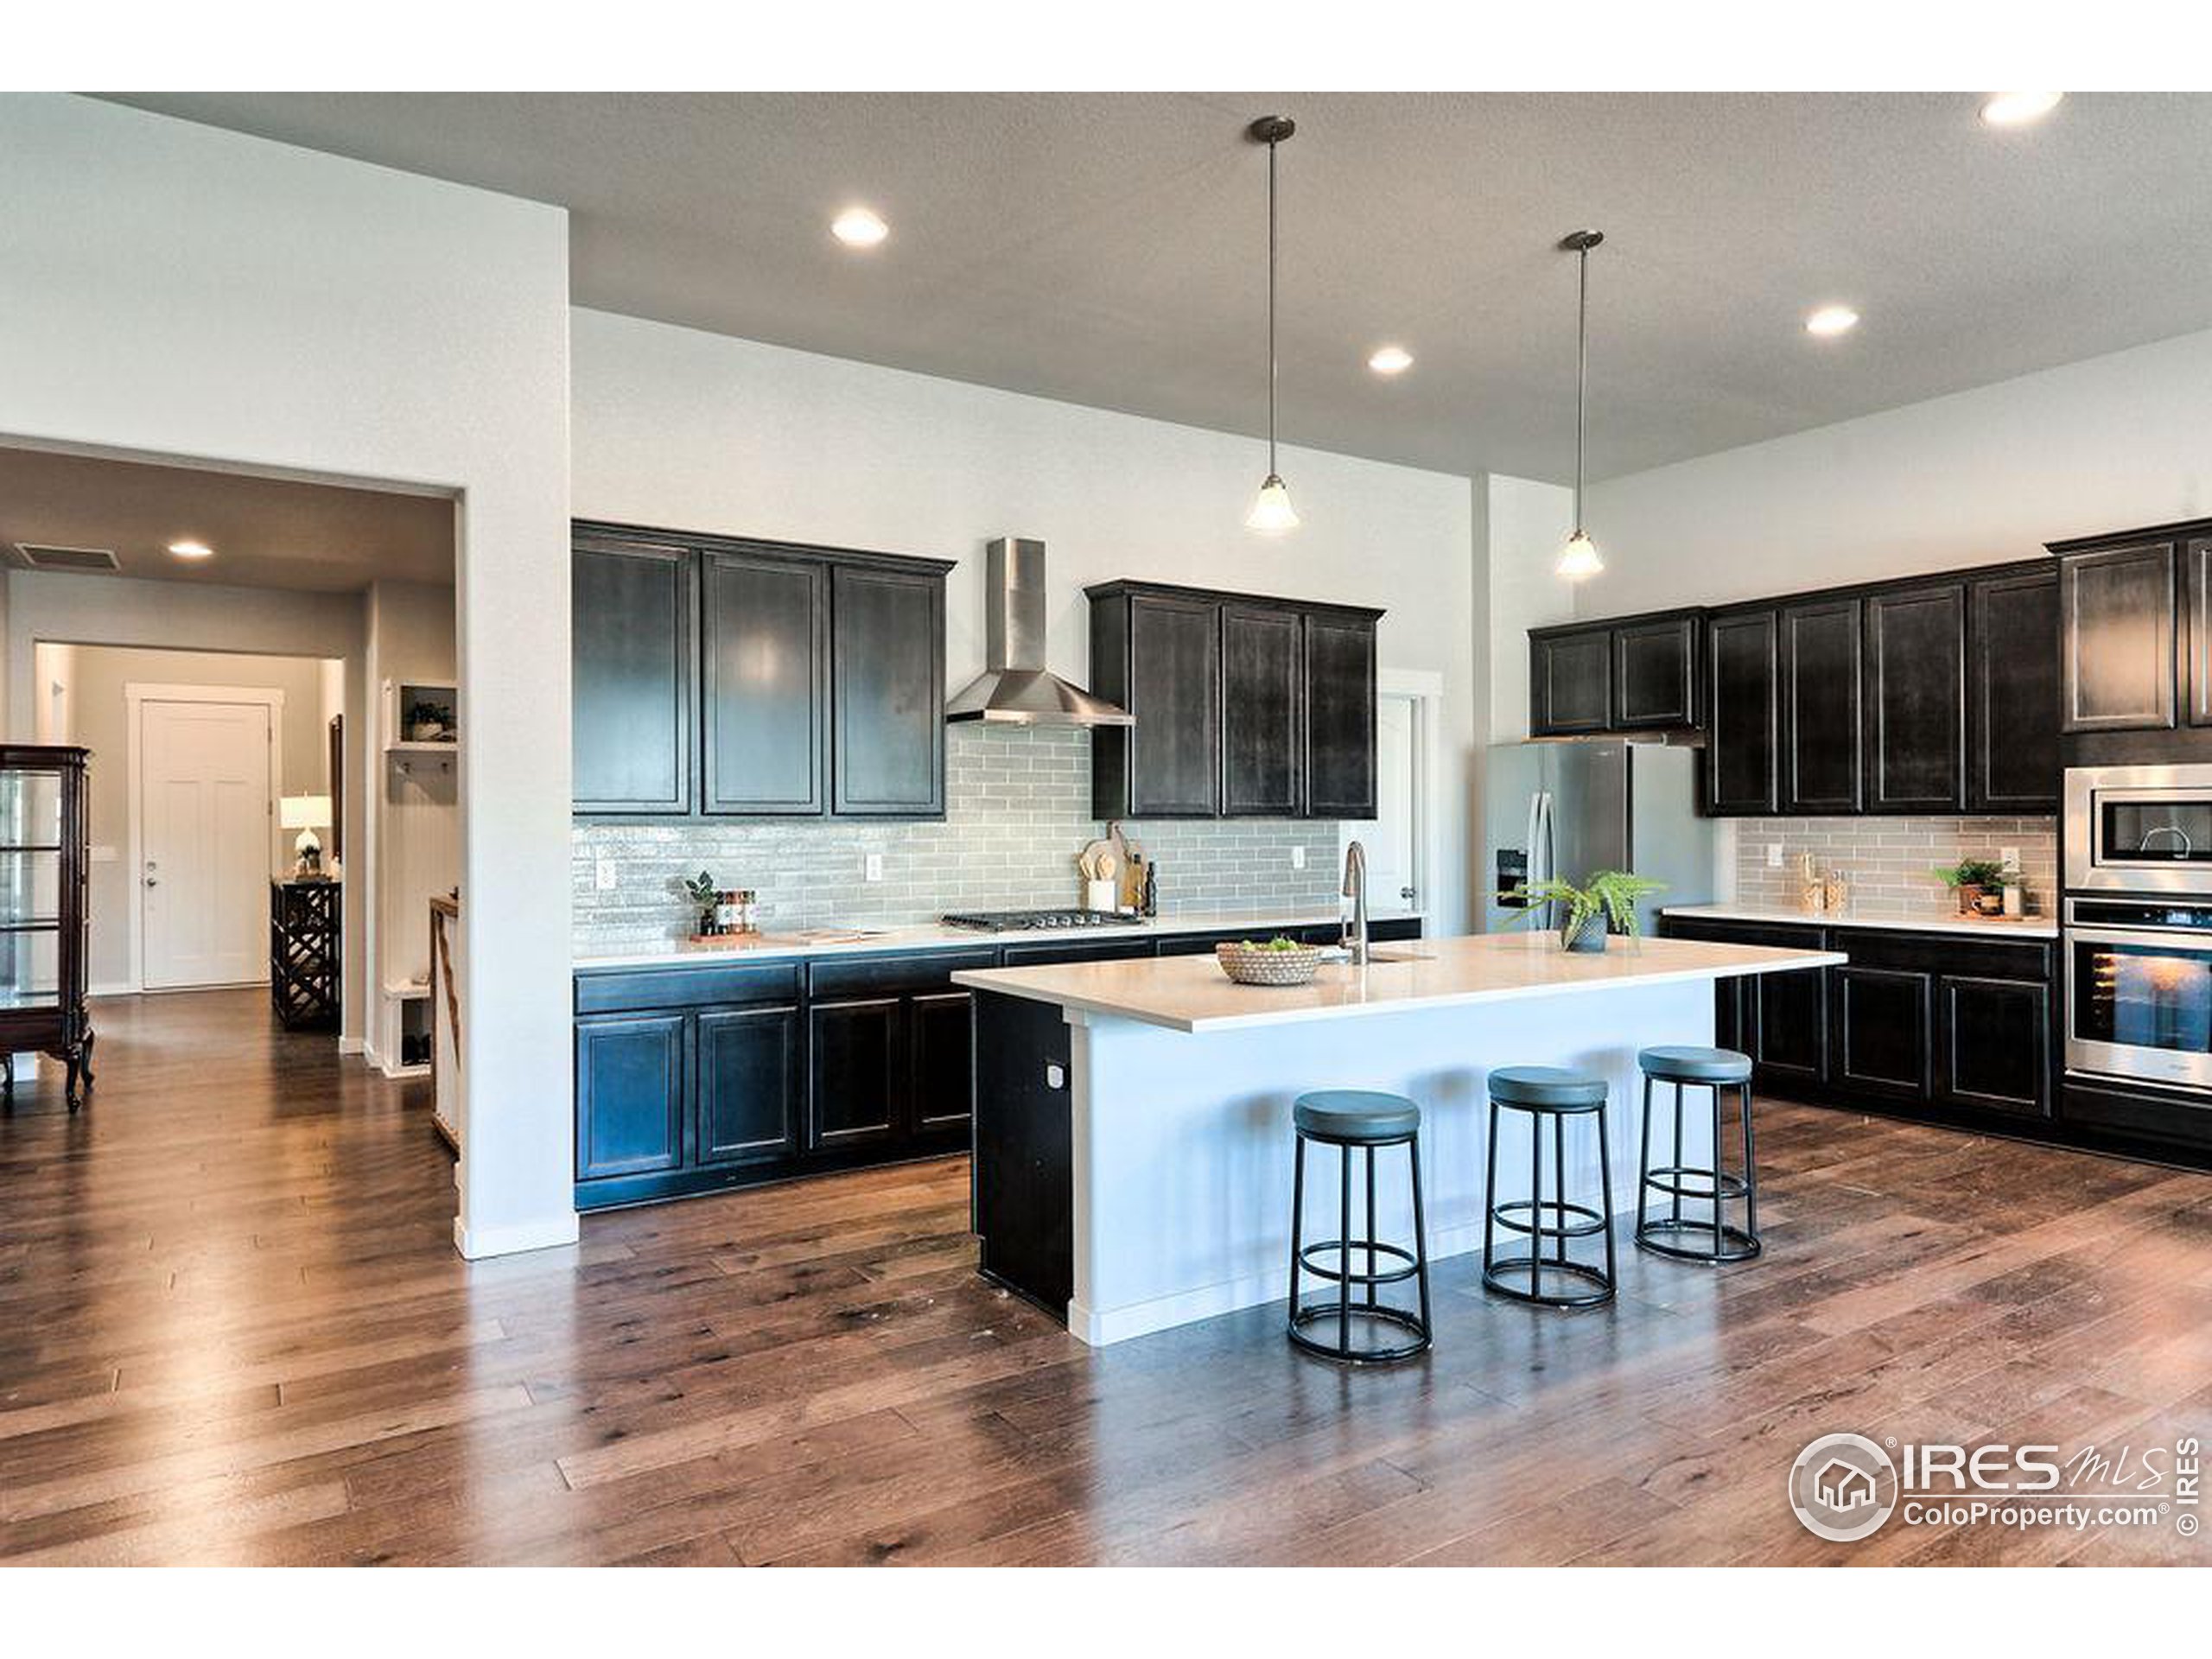 a kitchen with stainless steel appliances kitchen island granite countertop a table chairs sink and cabinets